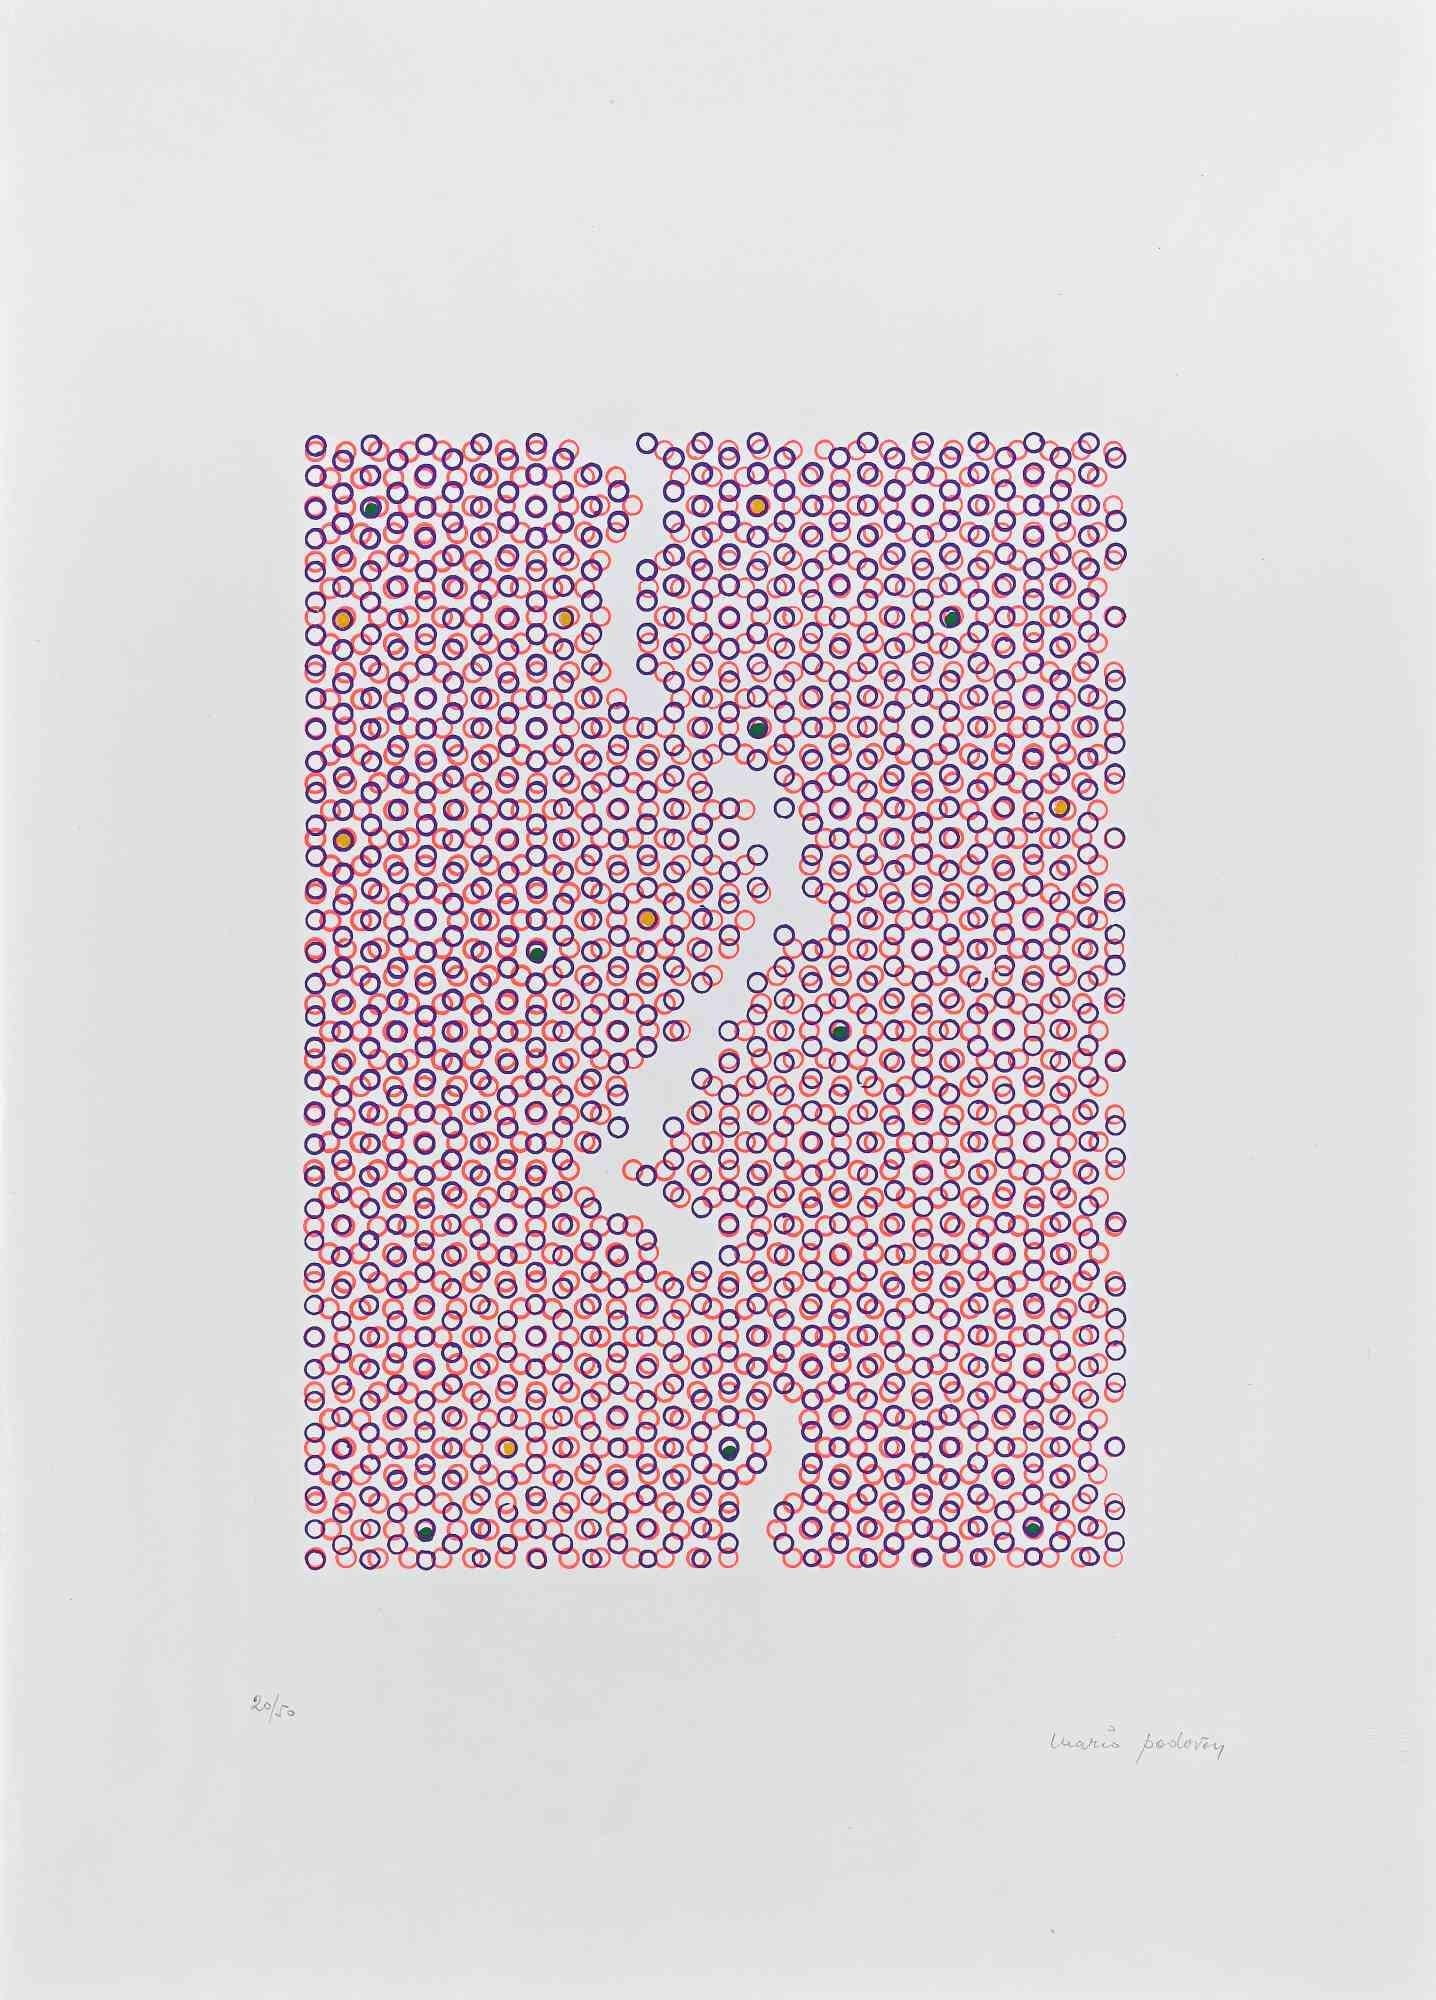 Abstract Composition in Pink  - Screen Print by Mario Padovan - 1971